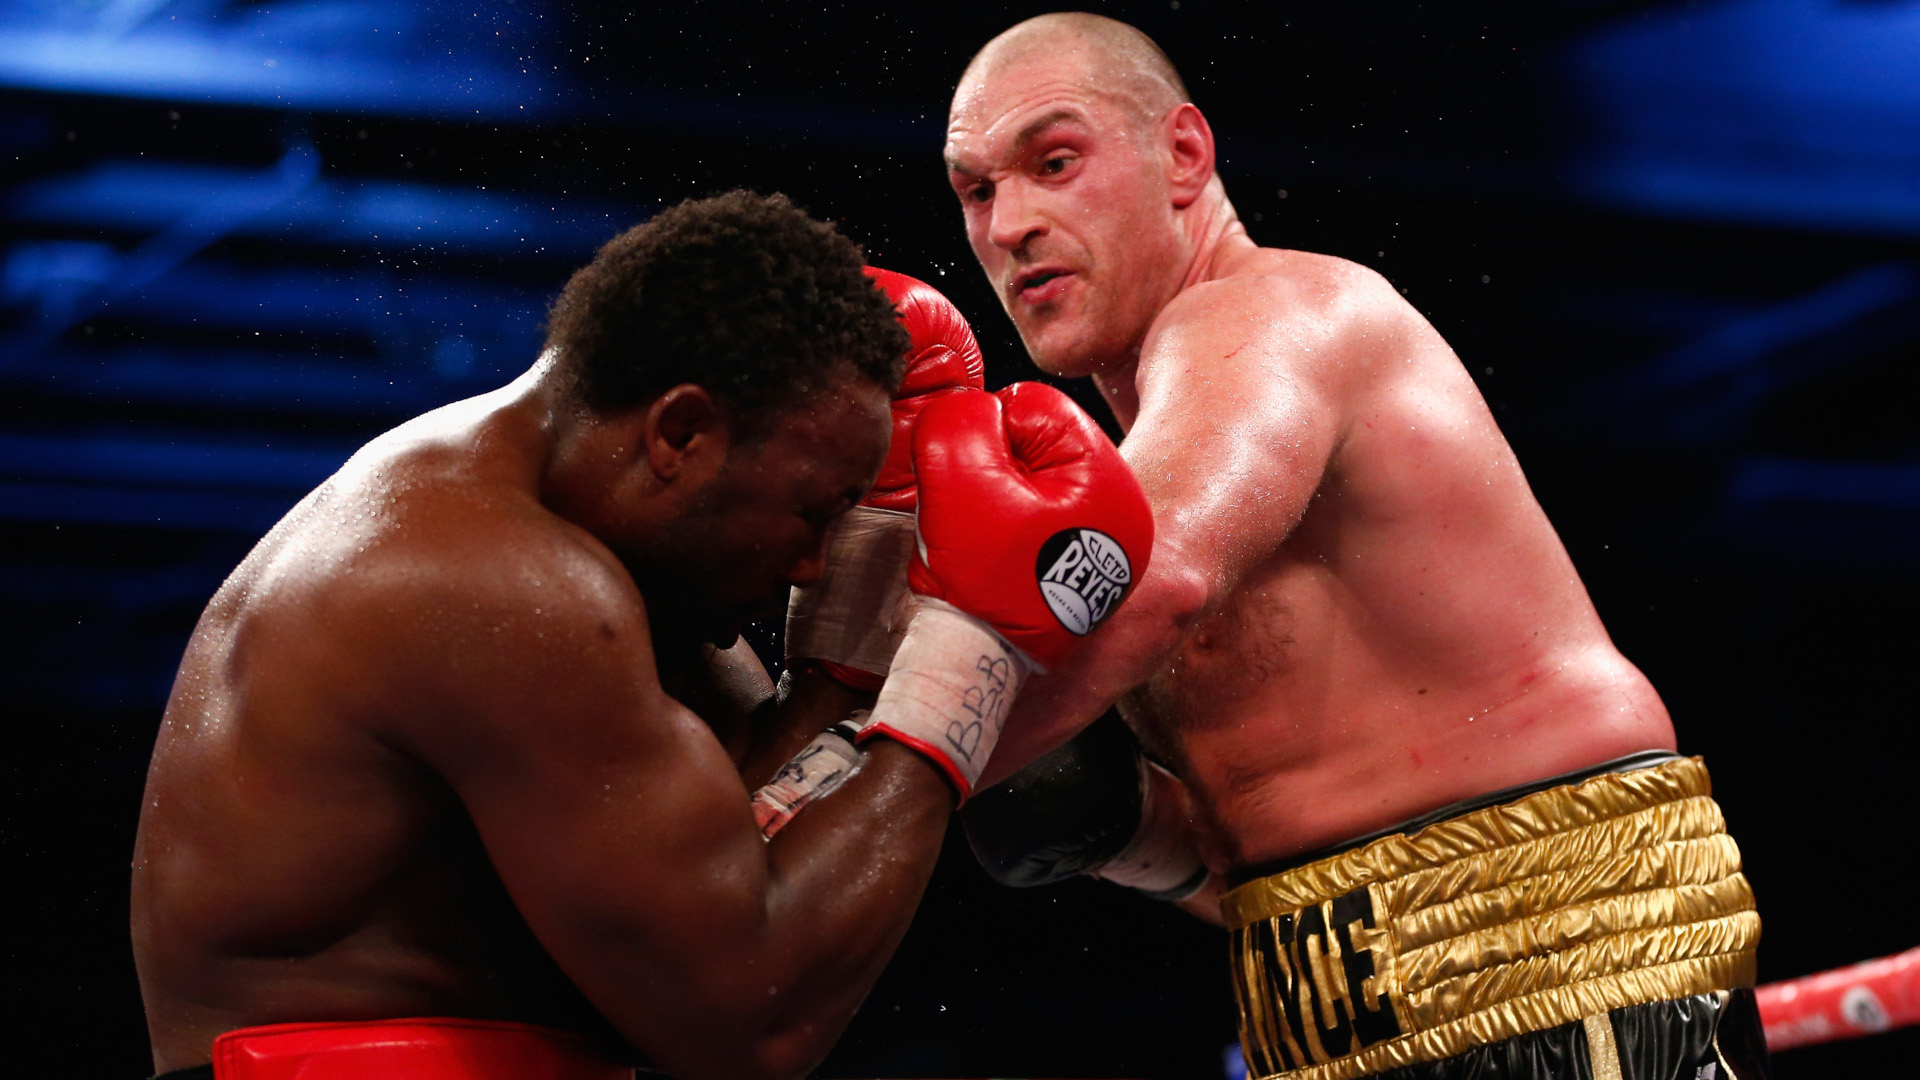 Fury vs Chisora live stream how to watch boxing online from anywhere today TechRadar